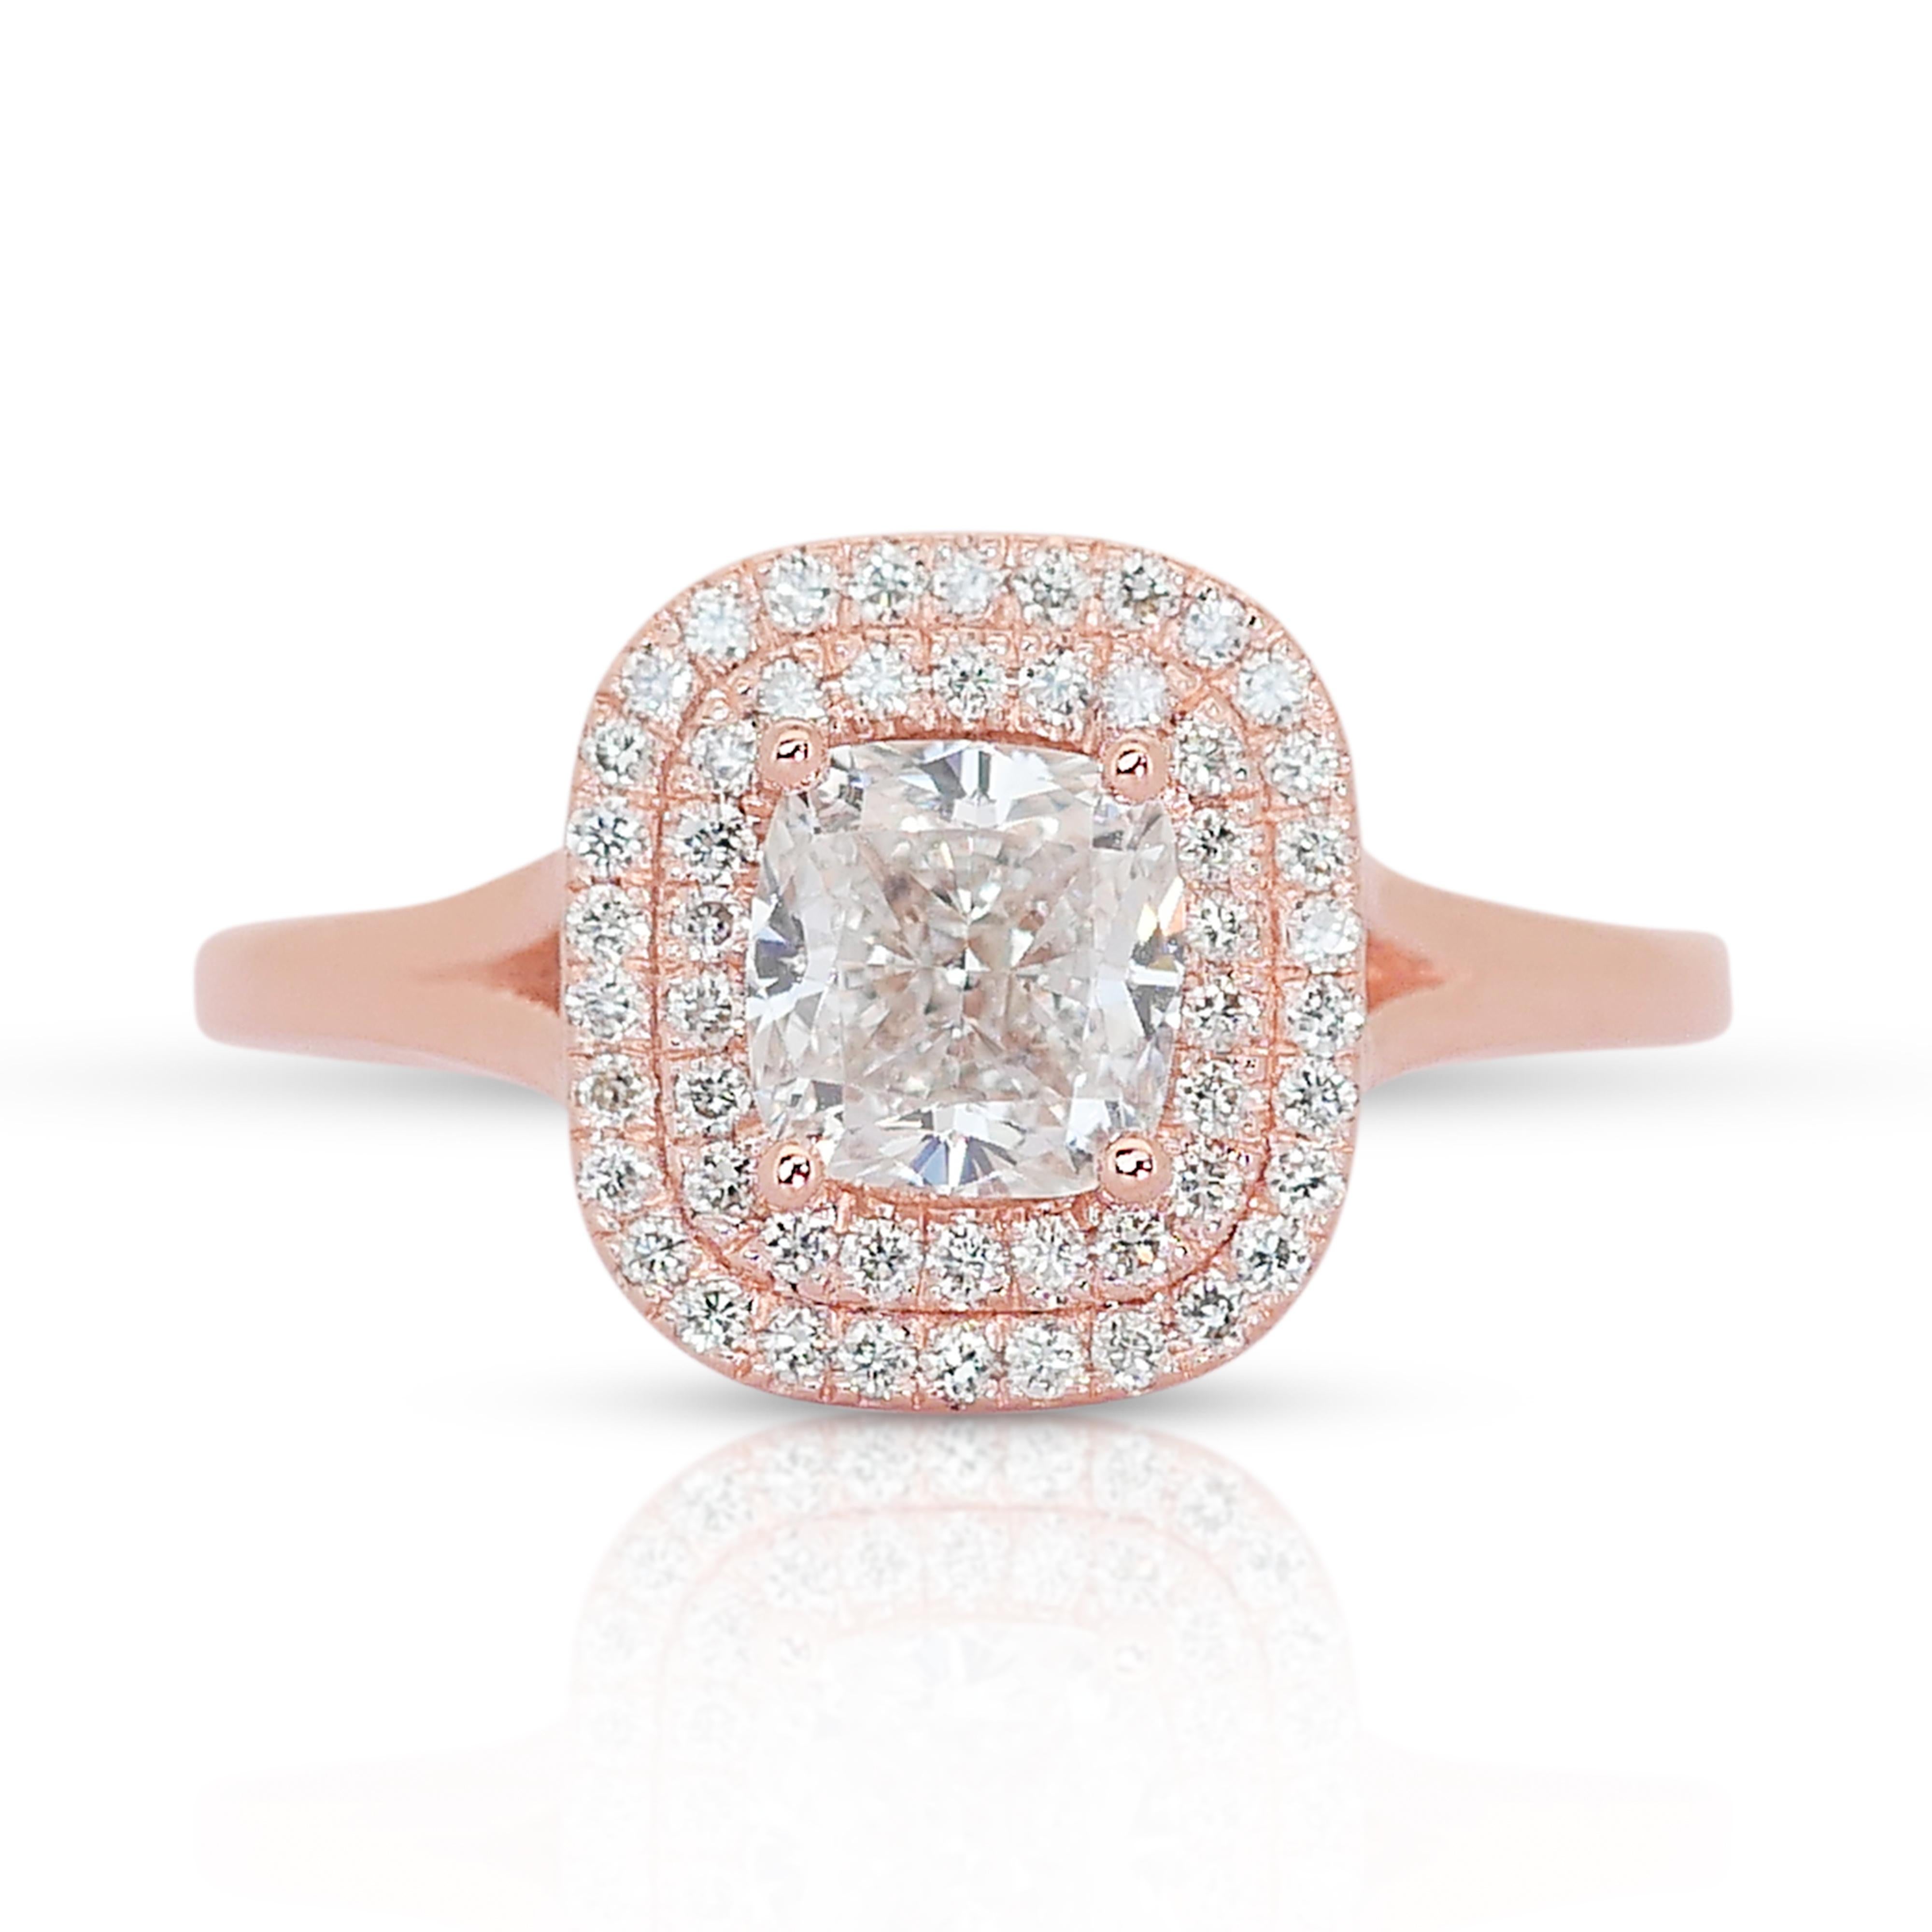 Timeless 14k Rose Gold Diamond Double Halo Ring w/1.23 ct - IGI Certified

Embrace timeless elegance with this exquisite 14k rose gold double halo ring, featuring a stunning 1.00 carat square cushion diamond as its centerpiece. Encircling the